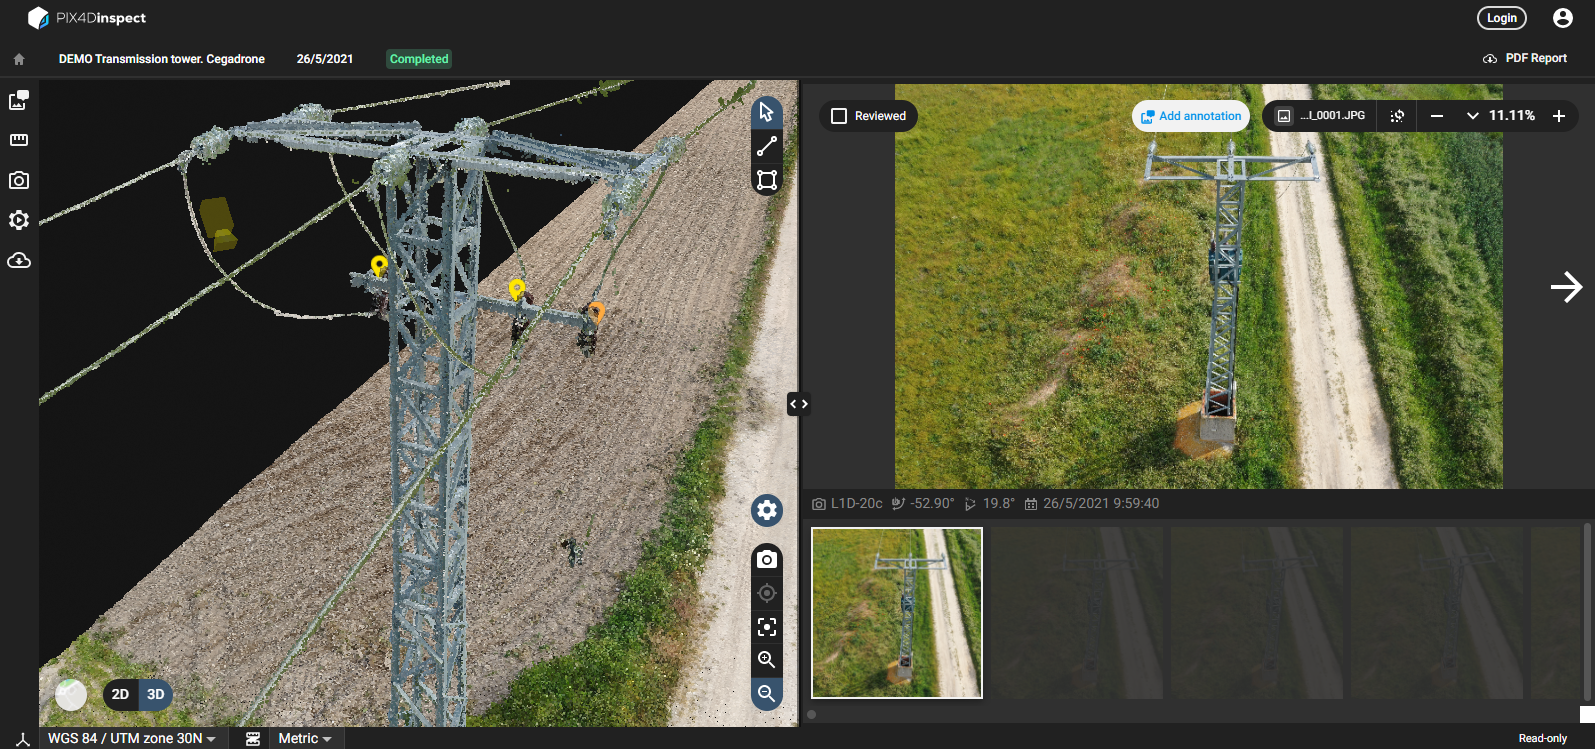 Transmission Tower Inspection Using PIX4DScan and PIX4DInspect